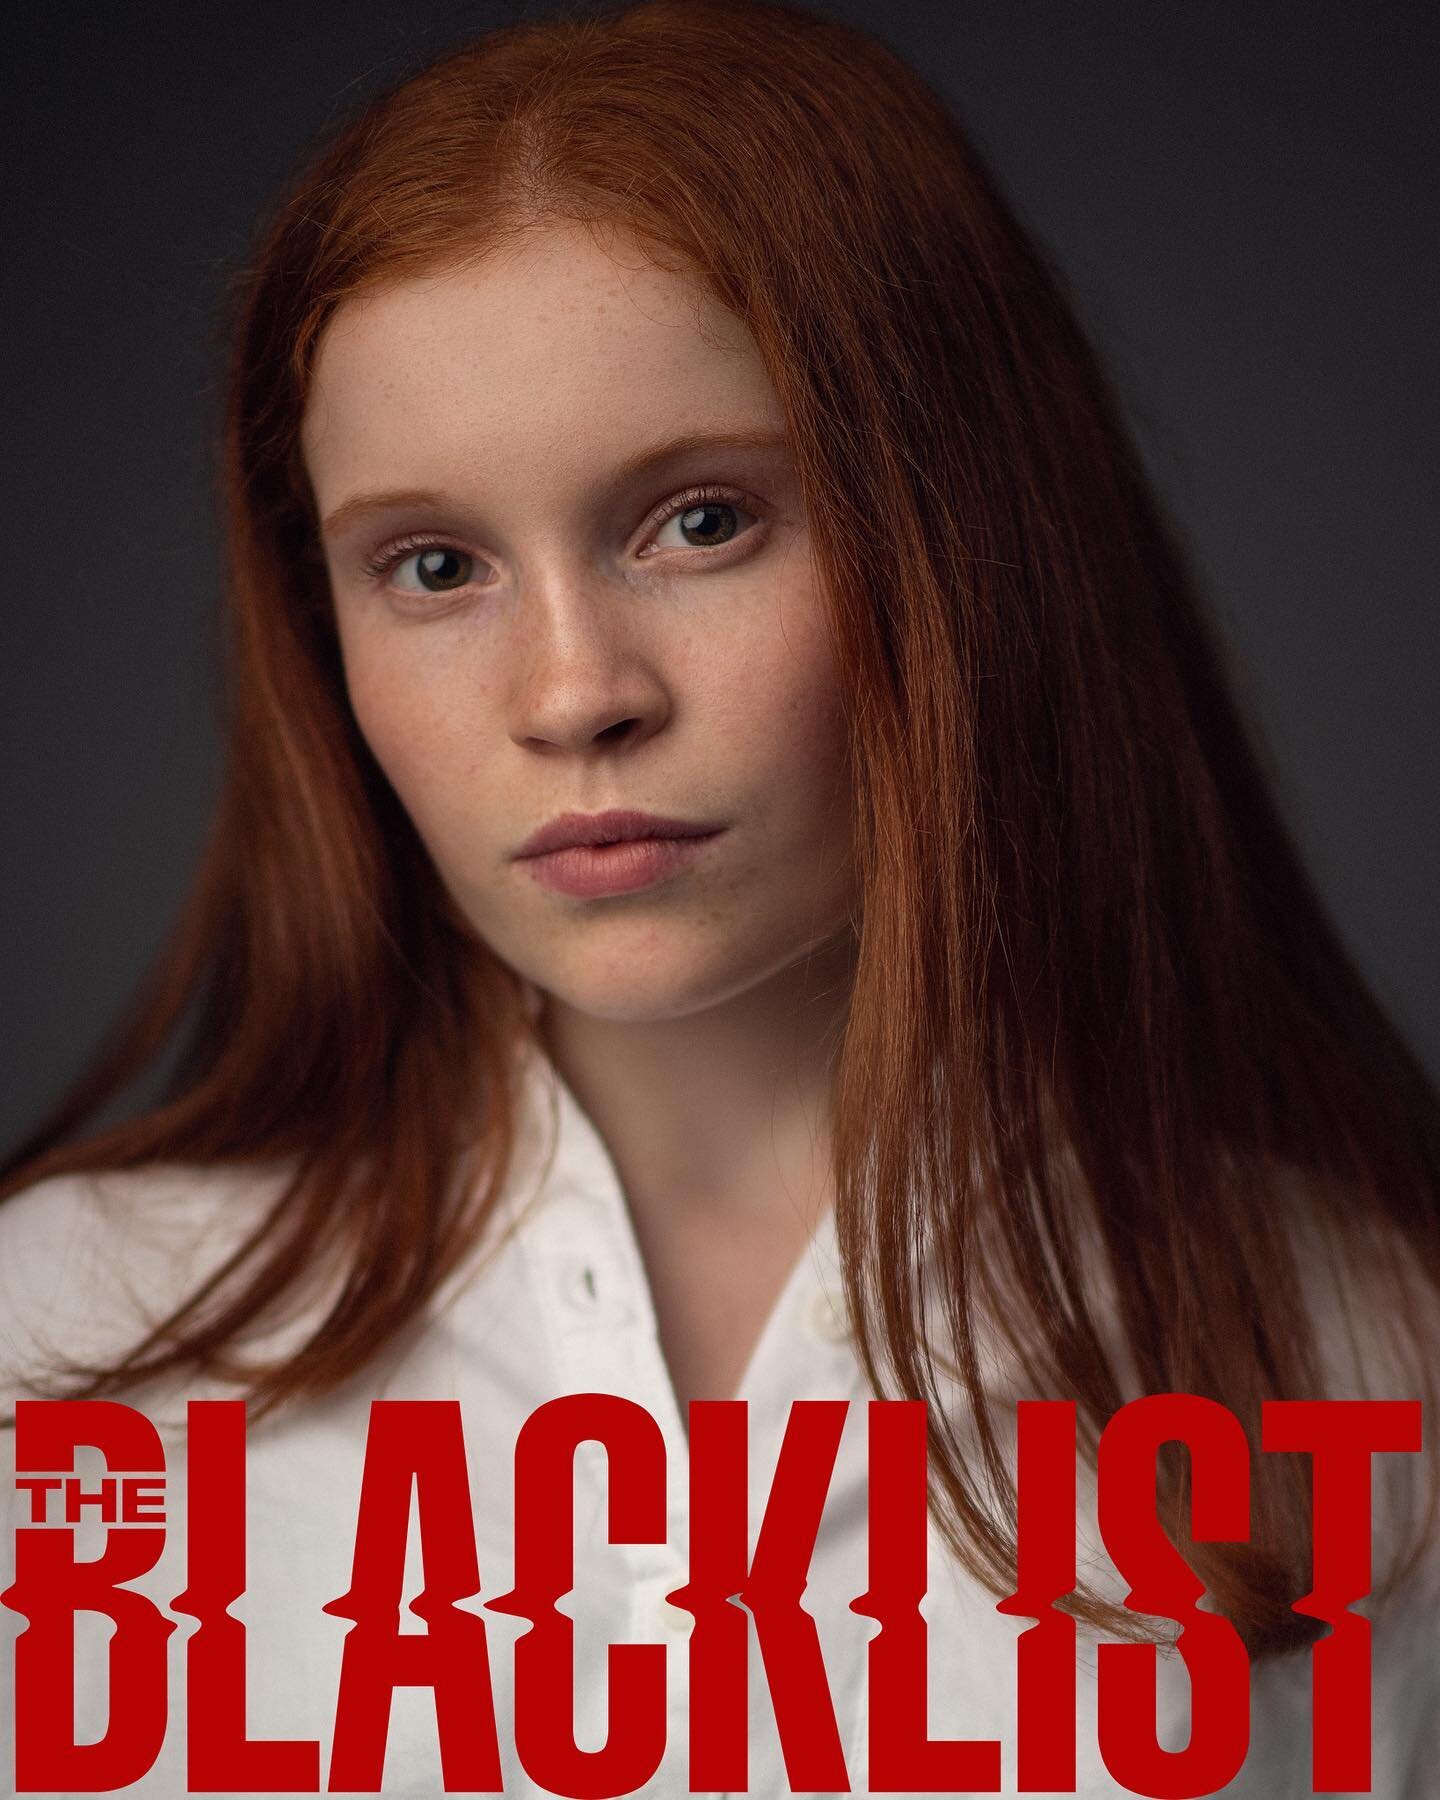 @zoey_deel makes her network debut with a co-star role on the primetime episodic NBC's The Blacklist! She premieres in episode 21, season 8. The show will air June 16th at 10 PM on the NBC network and can be streamed on Peacock TV. 

I am so excited 